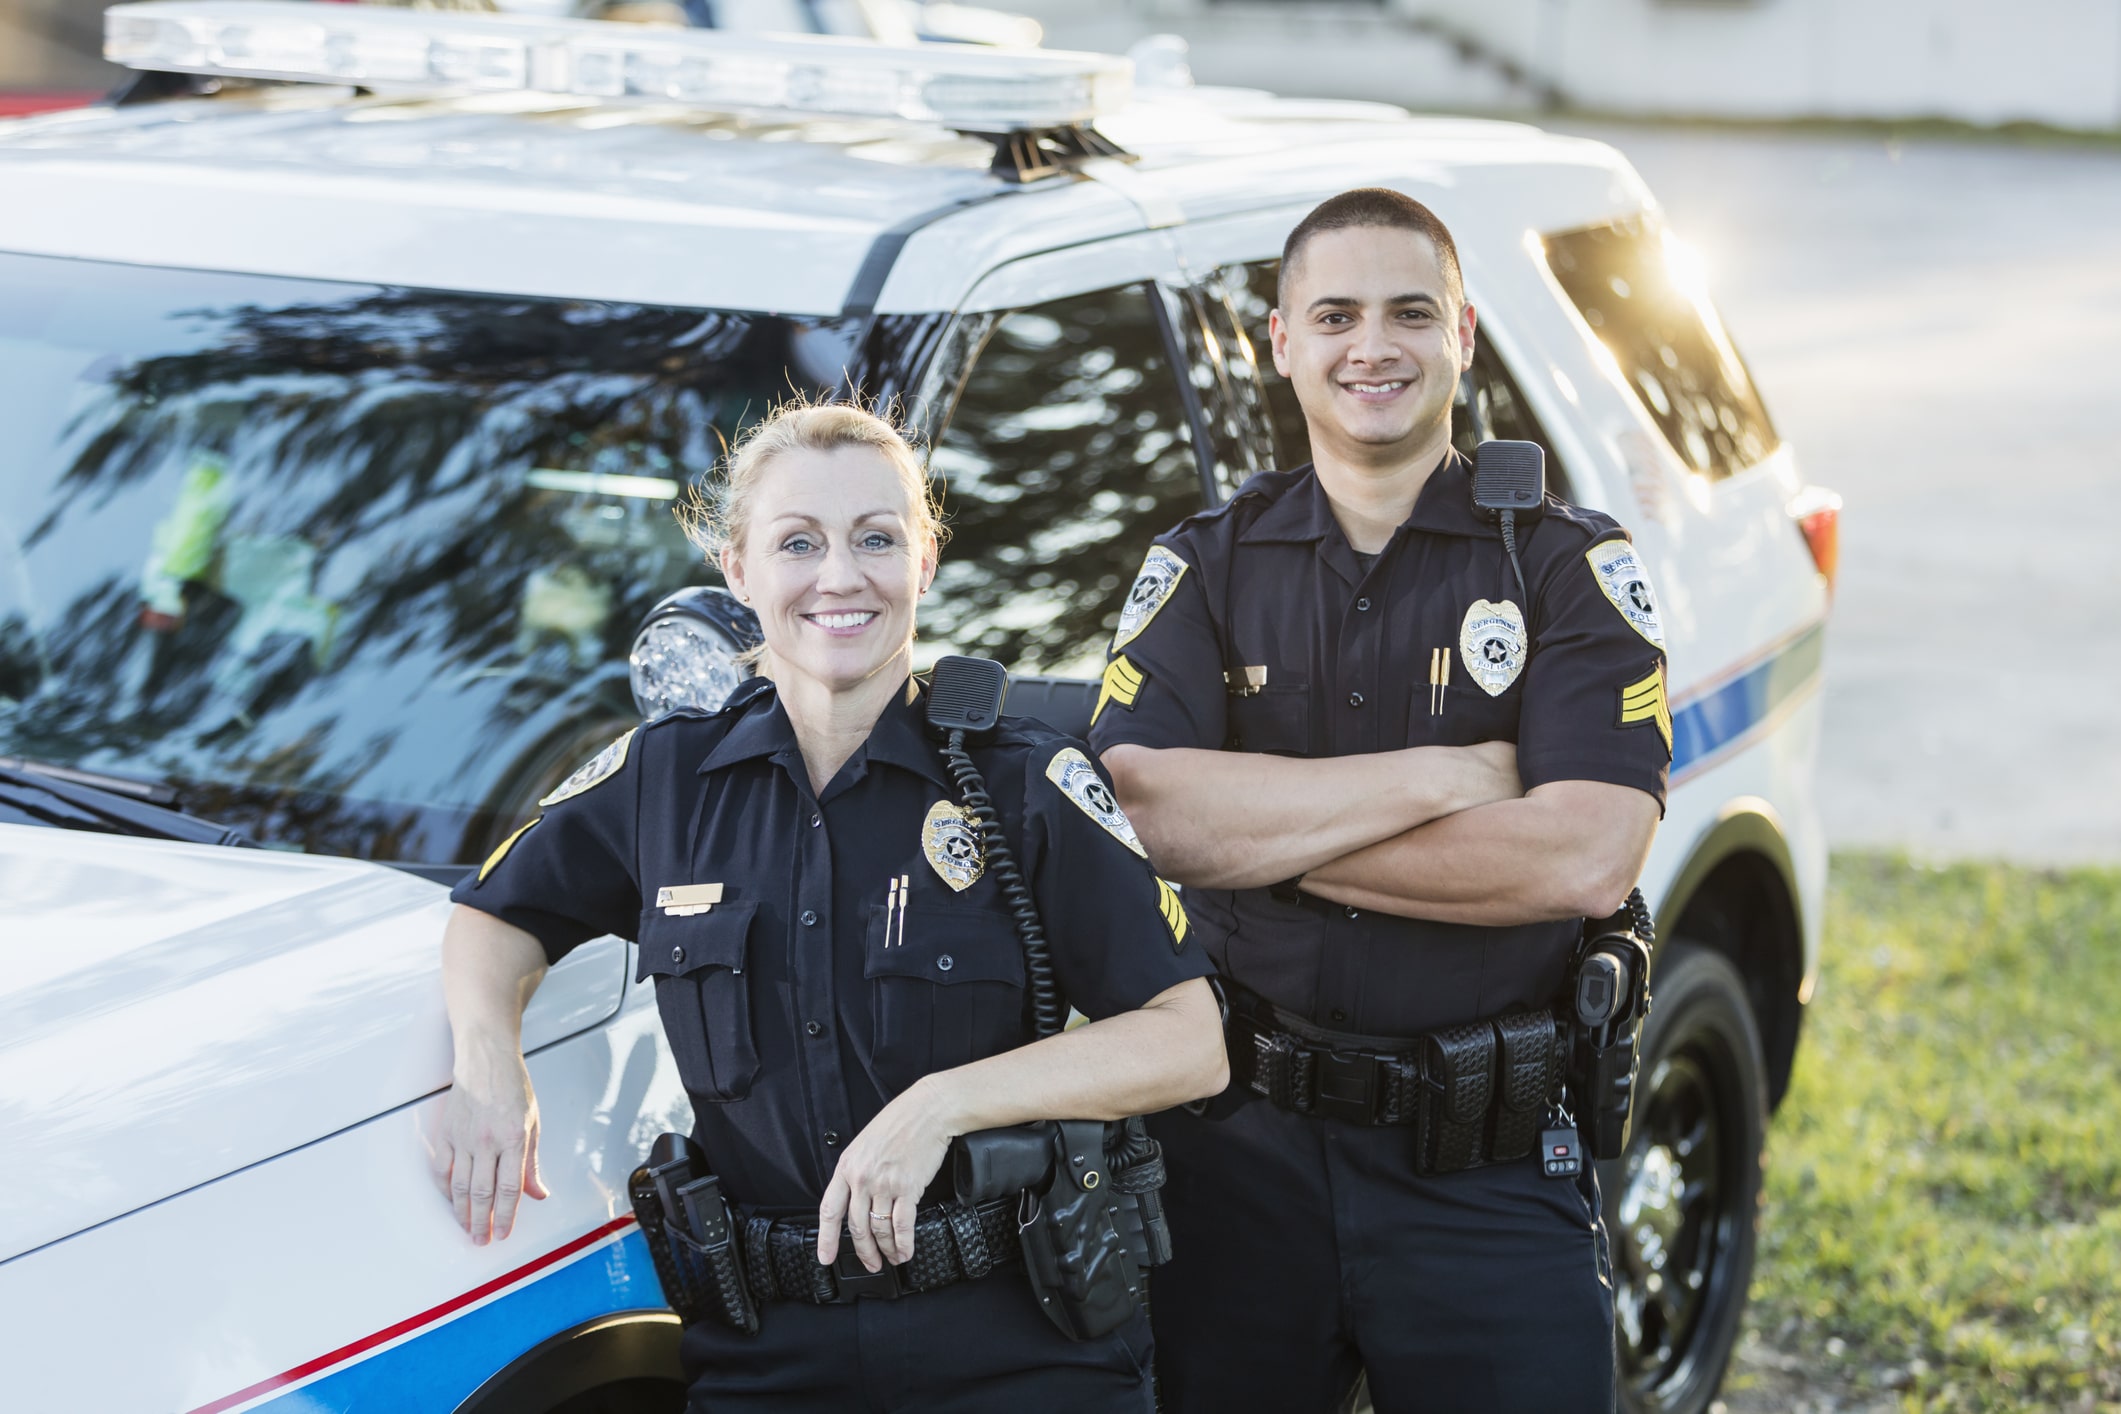 Law Enforcement Exams Overview | Career in Law Enforcement